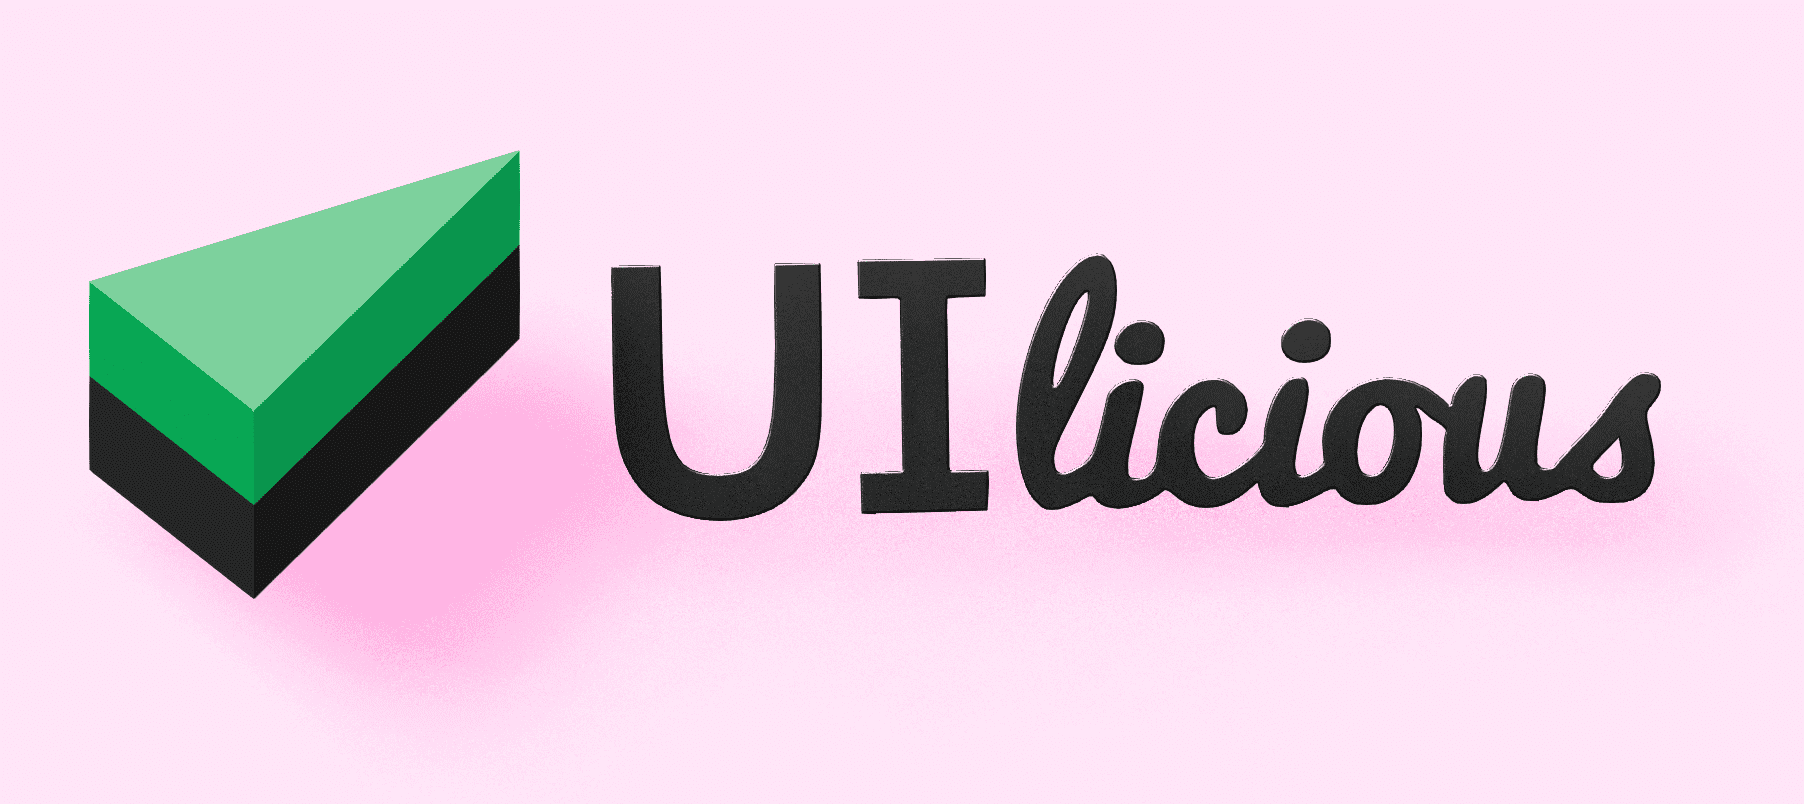 UI-licious logo in 3D, front view